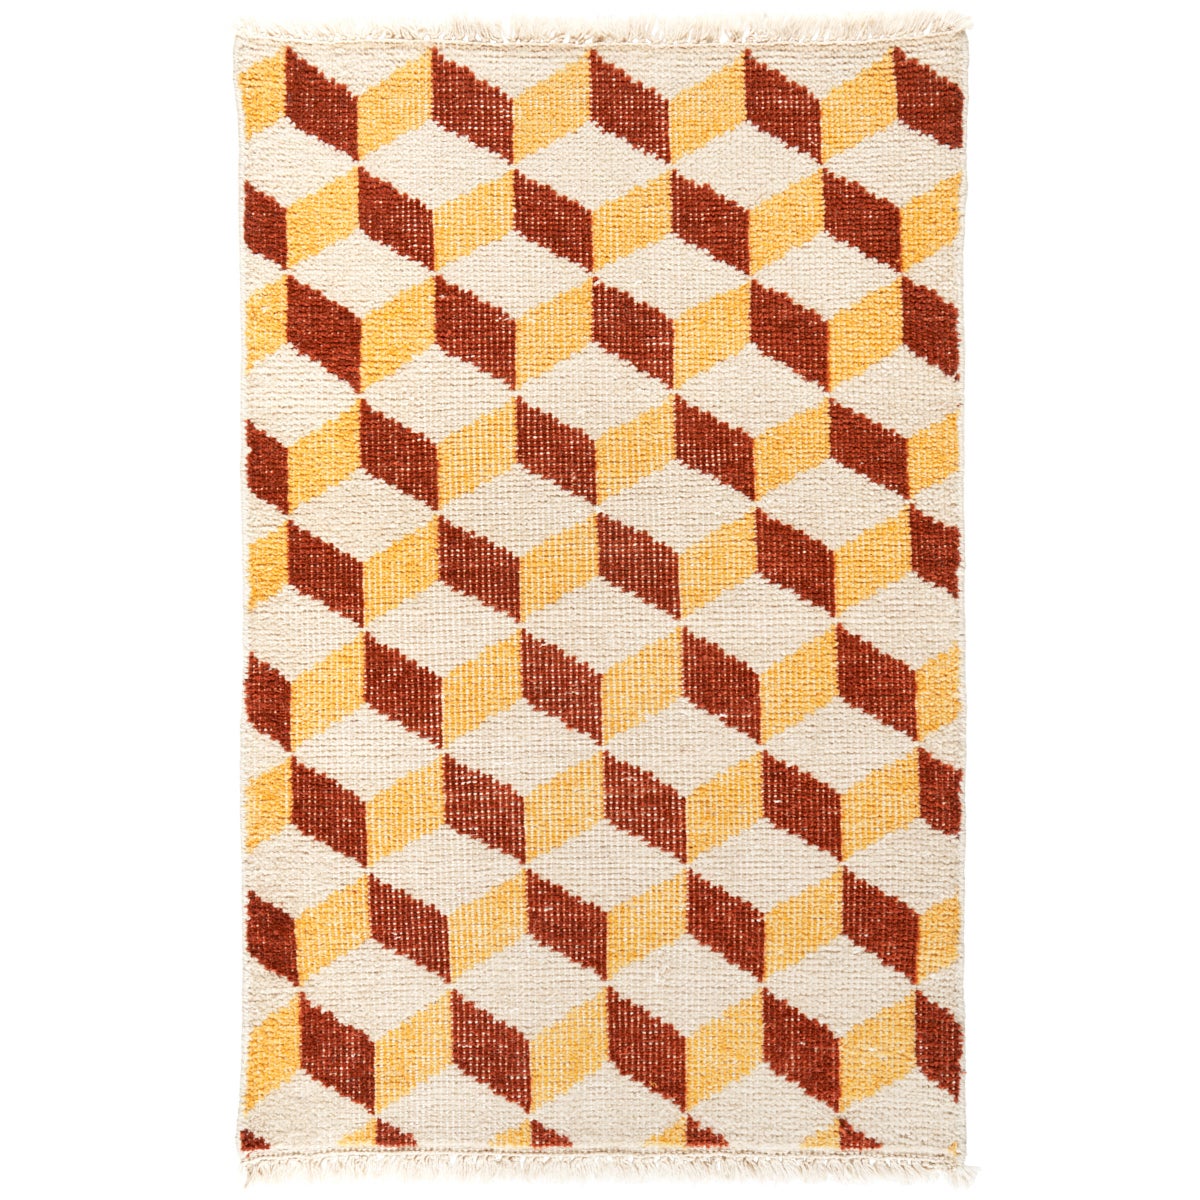 Pompeii Hand-Knotted Rug in Yellow & Red, 2x3'